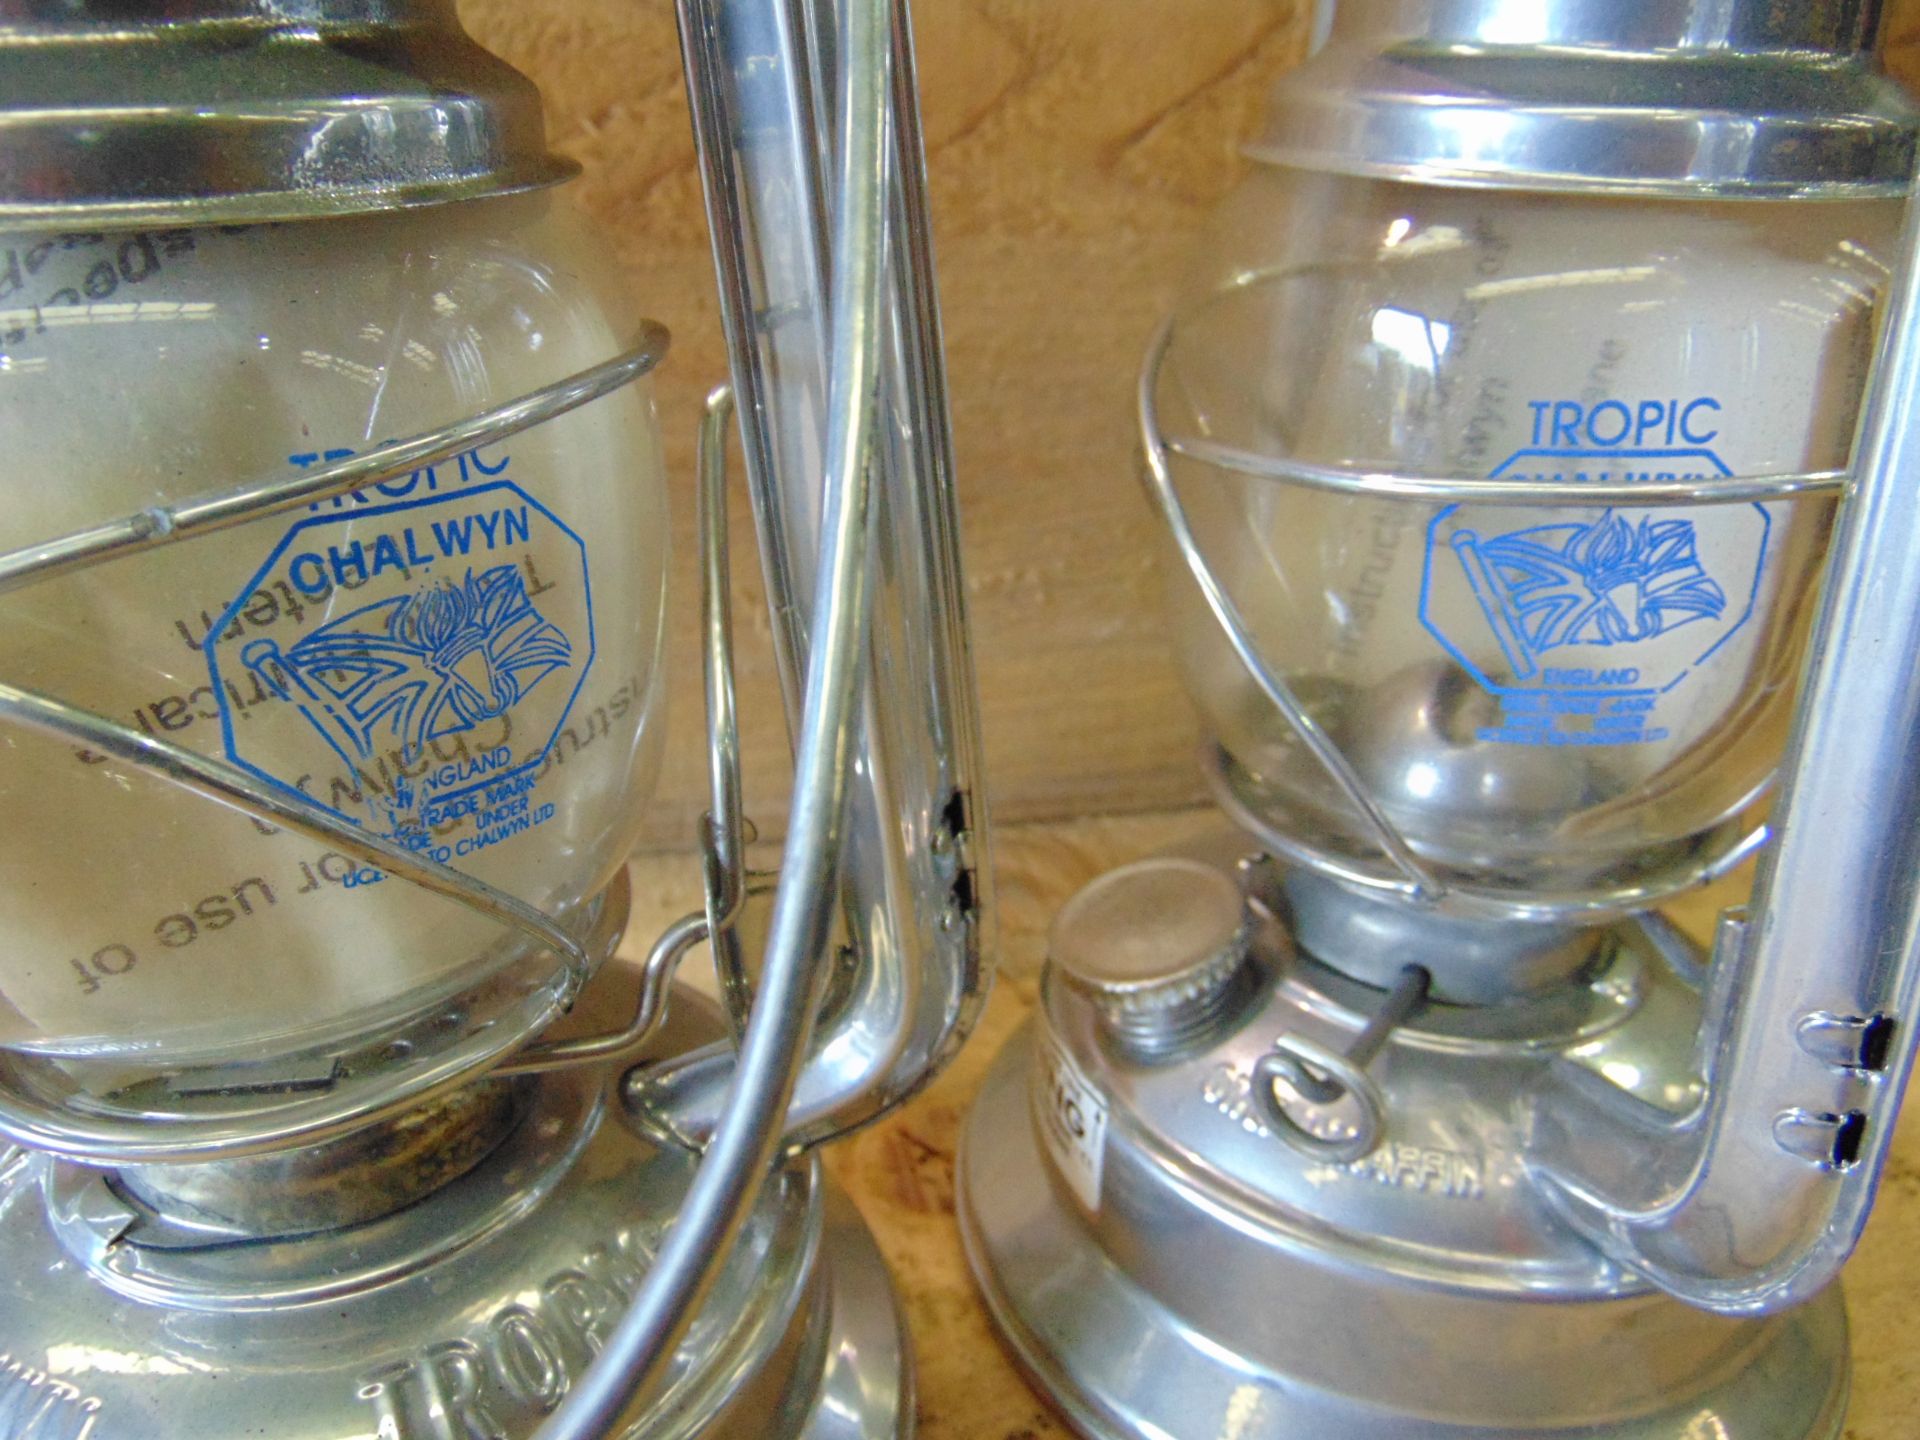 2 x Unissued Vintage Chalwyn Tropic Hurricane Lamps - Image 4 of 6